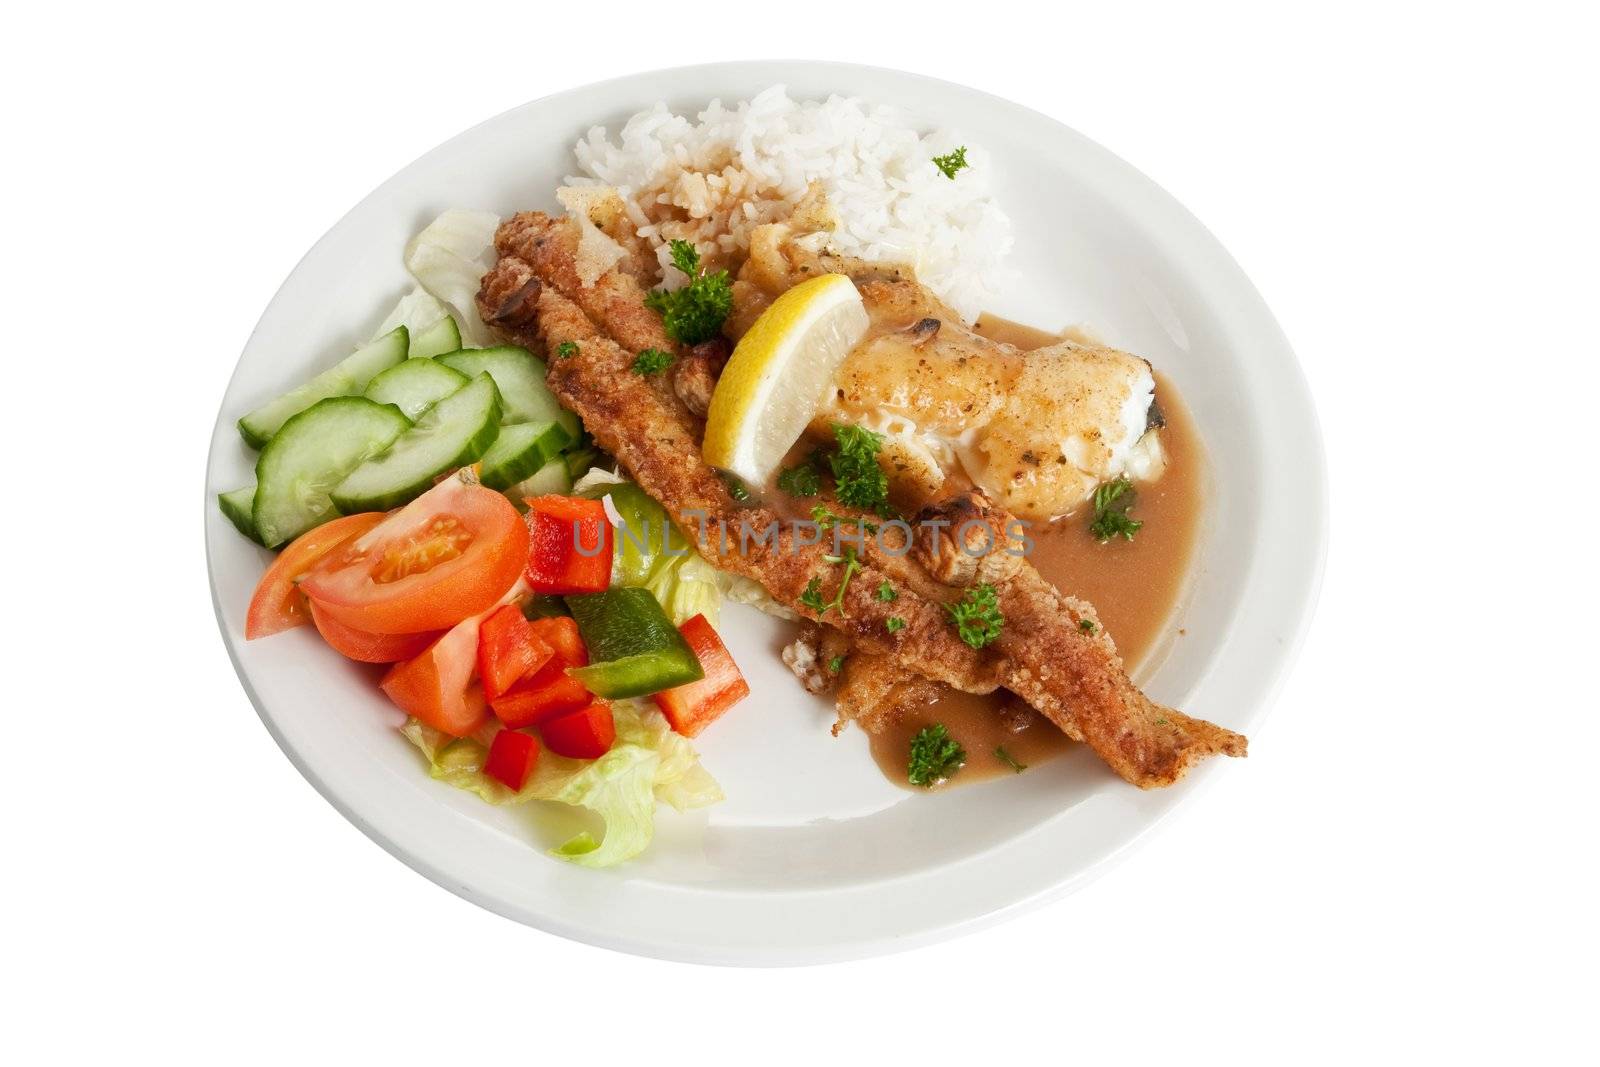 Plaice with rice and salad by sumos